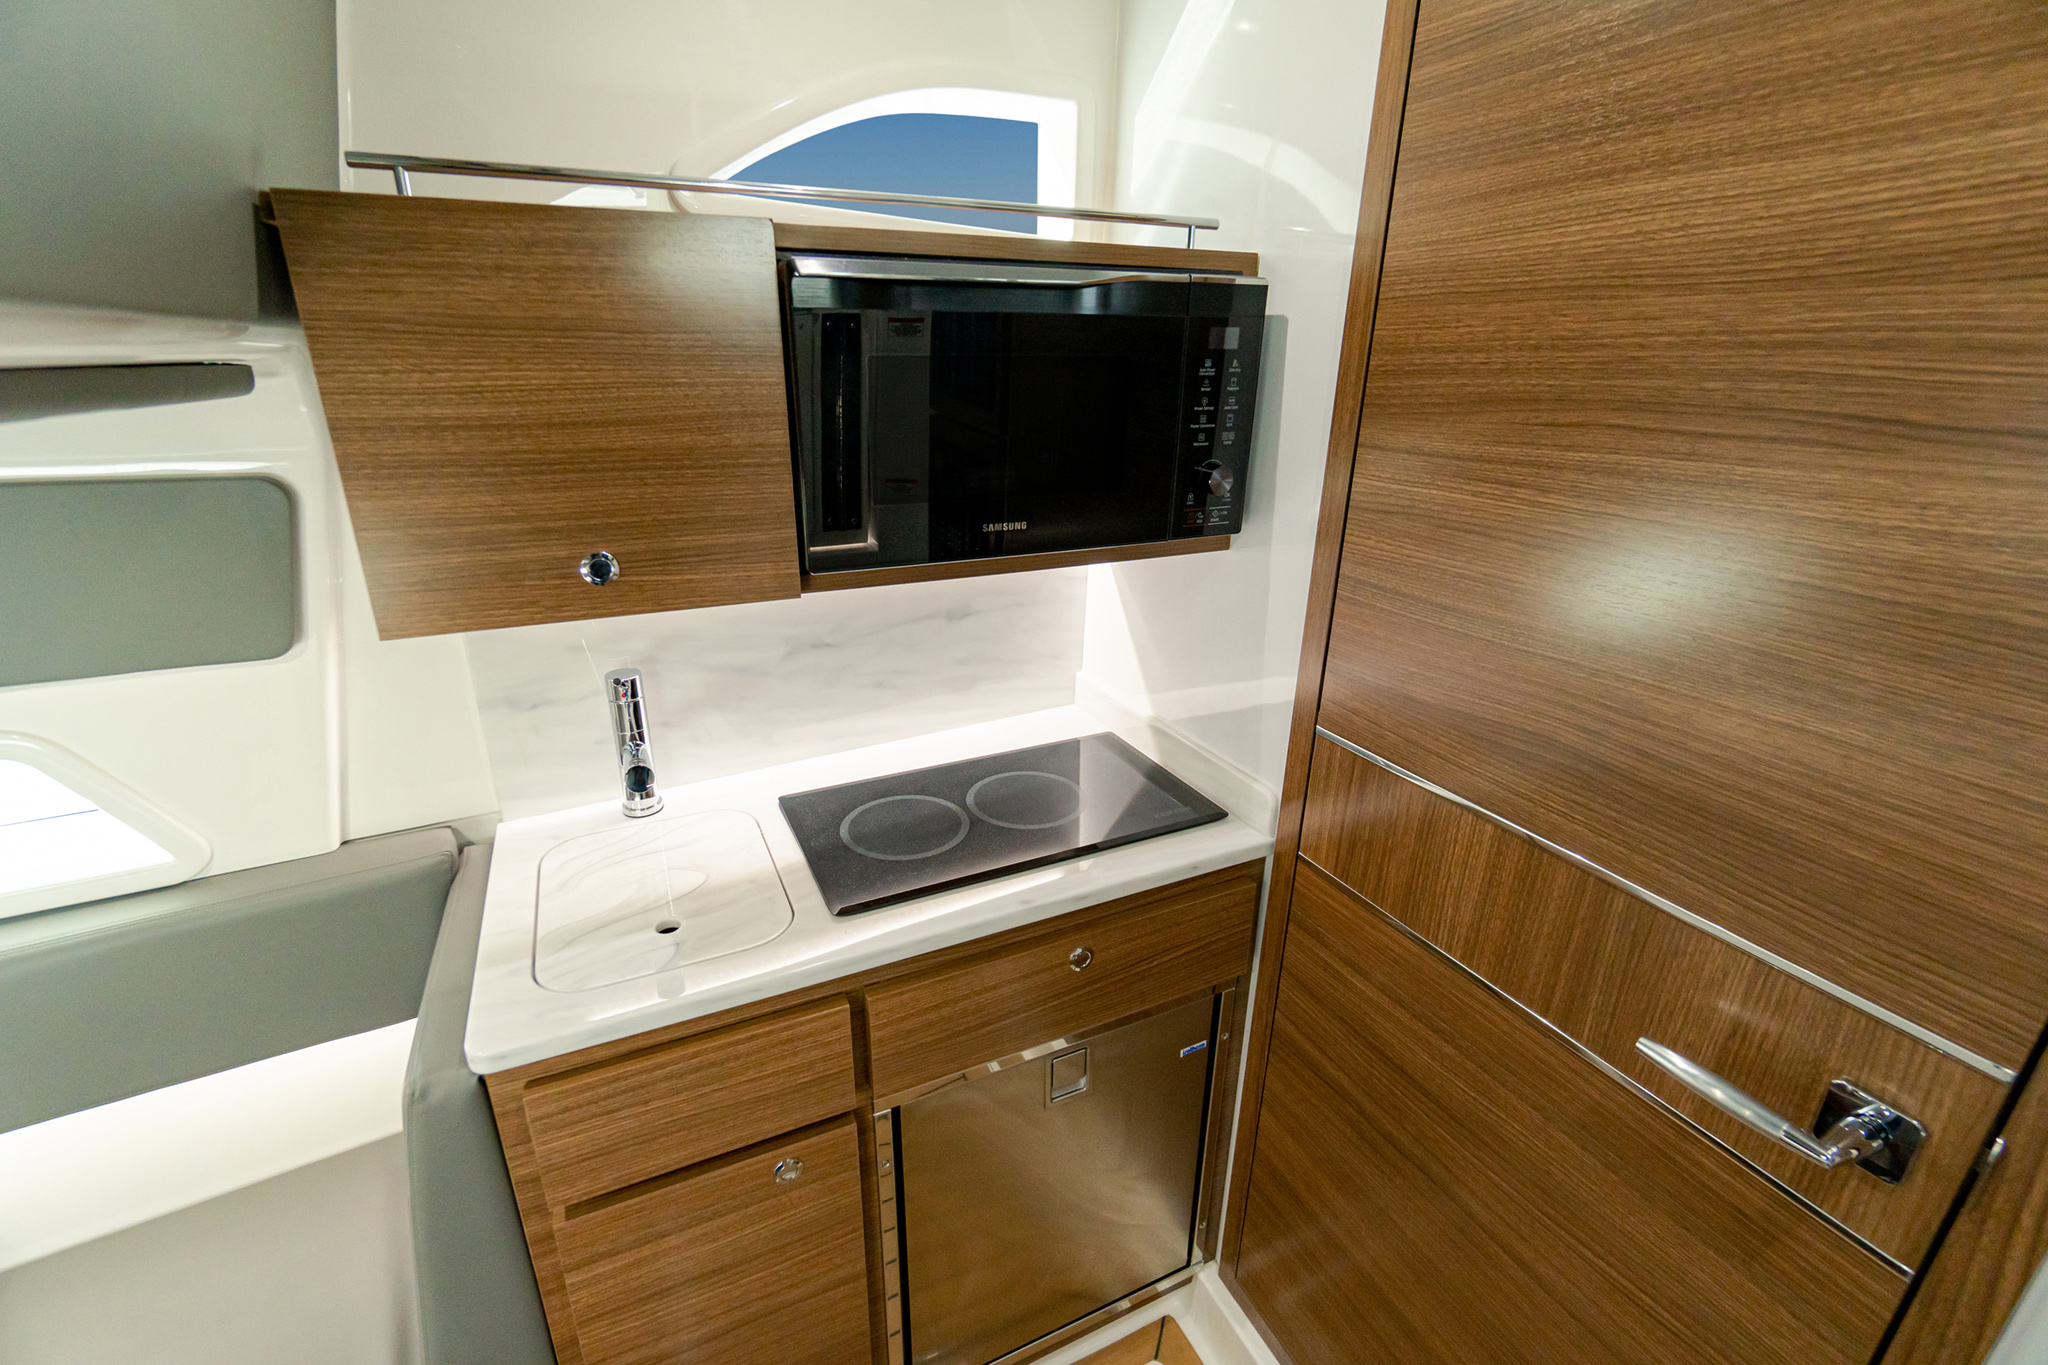 Galley features Corian counter, two-burner stove, stainless steel sink, microwave, fridge/freezer and storage.